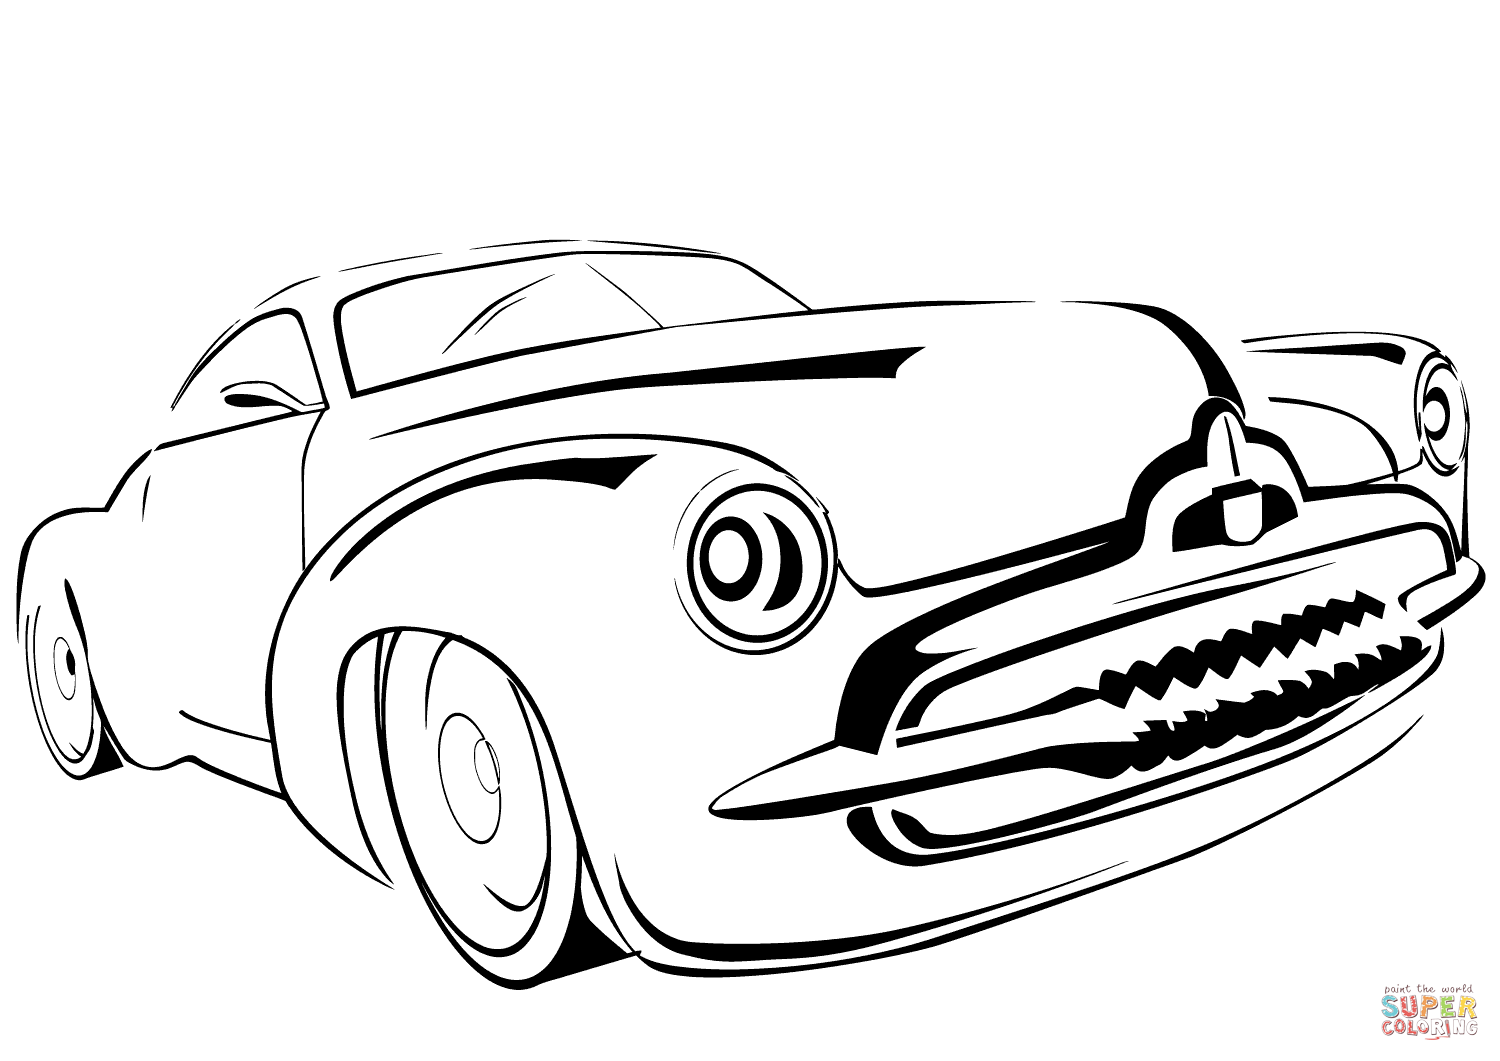 Classic car coloring page free printable coloring pages cars coloring pages coloring pages truck coloring pages